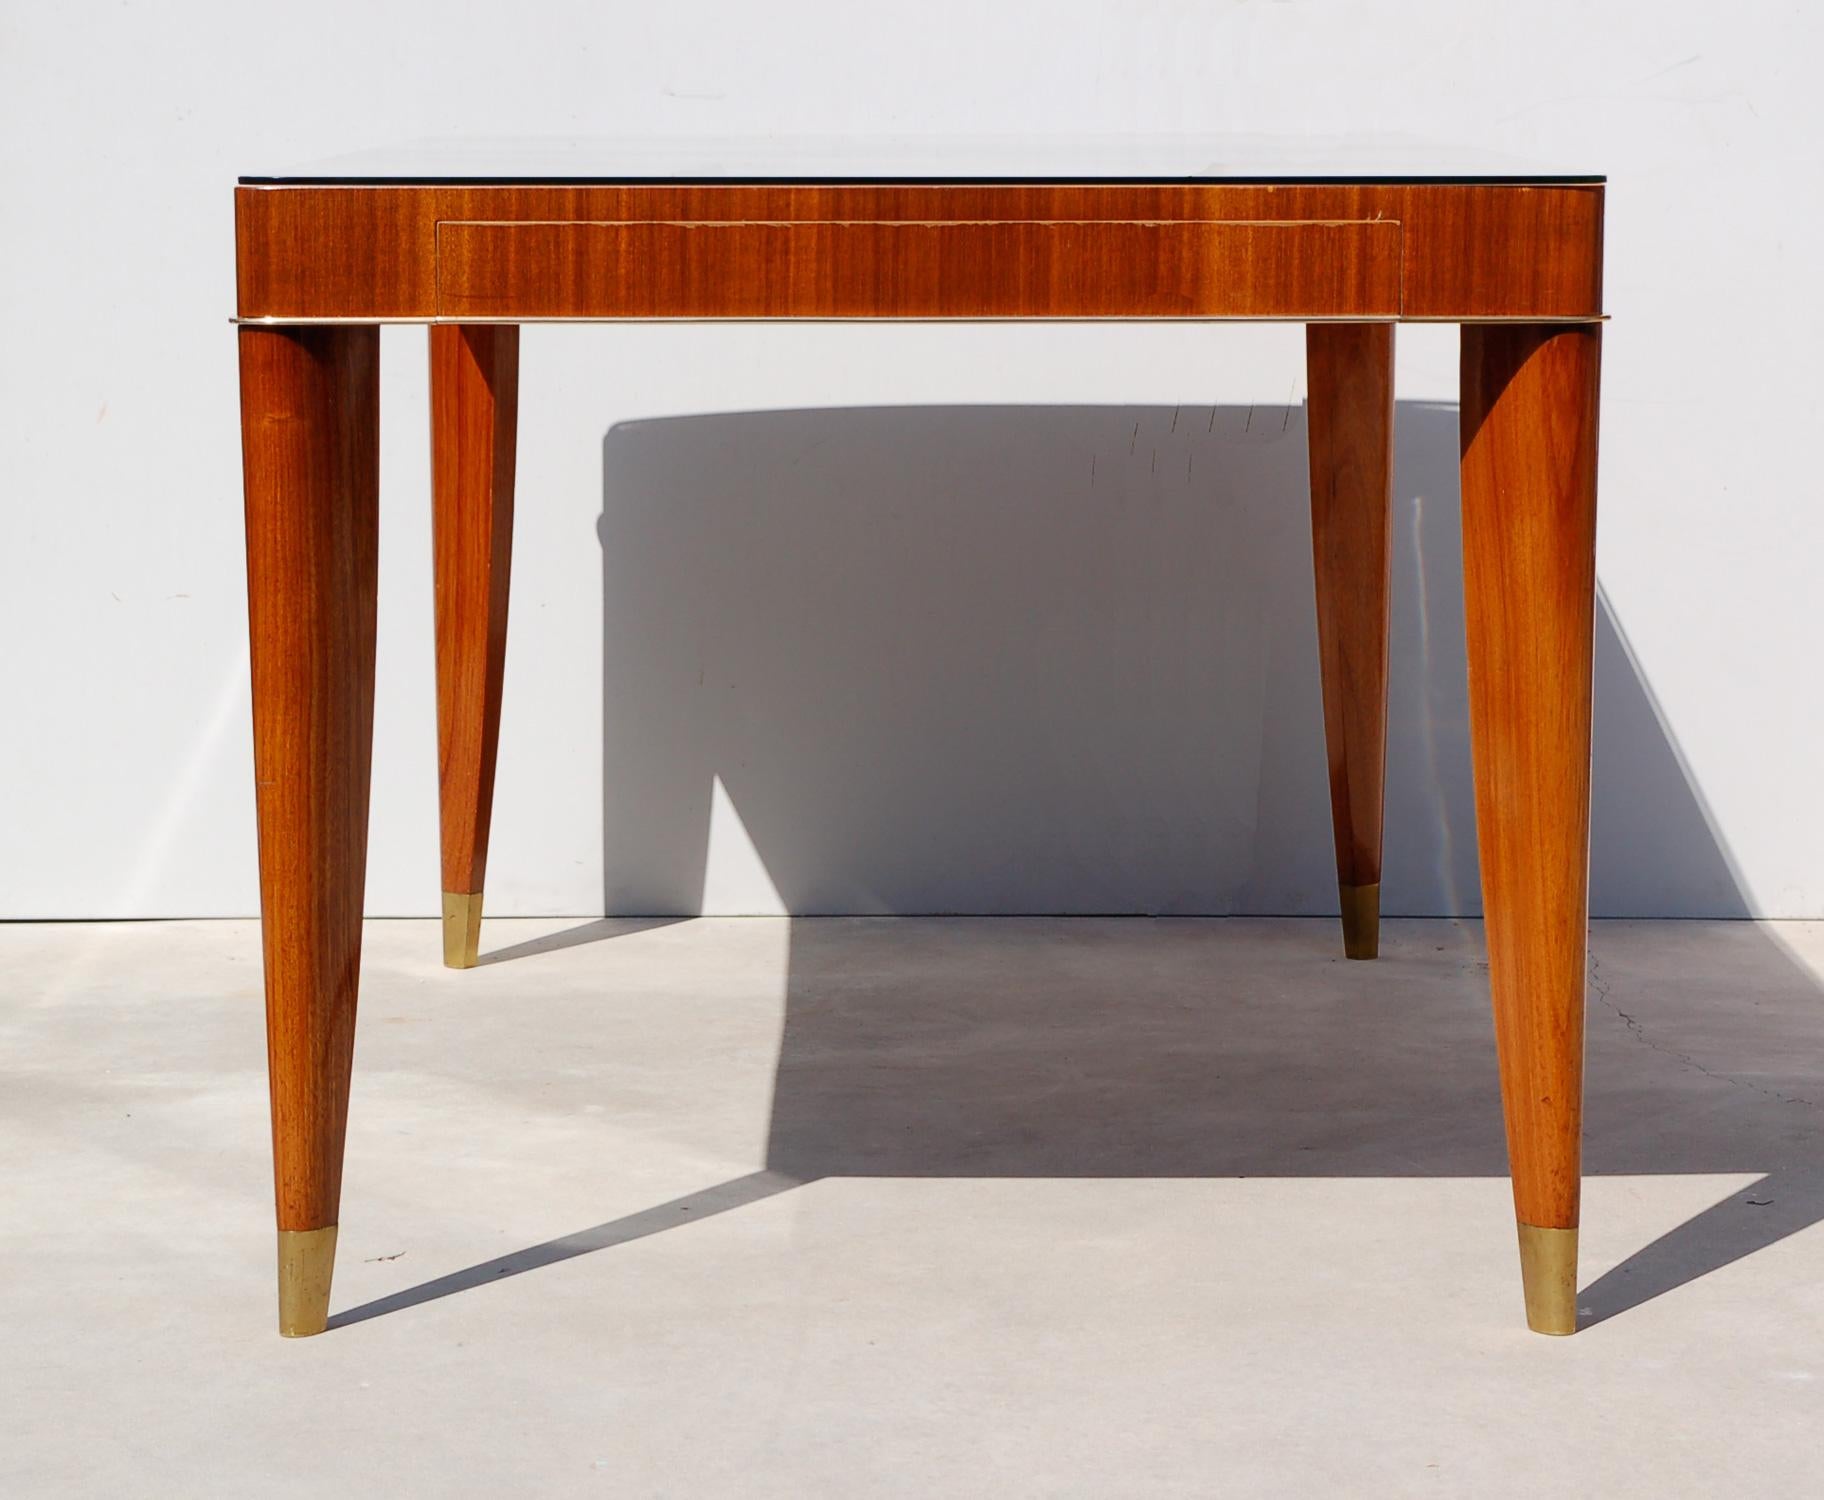 Extendable dining table by De Coene Frères chairs, model Jan/Jean, featured in original catalogue as the number 03-81-689 (Source: Noël Hostens, De Coene Archives). The design dates to the 1930s in late Art Deco, neoclassical style. The table is